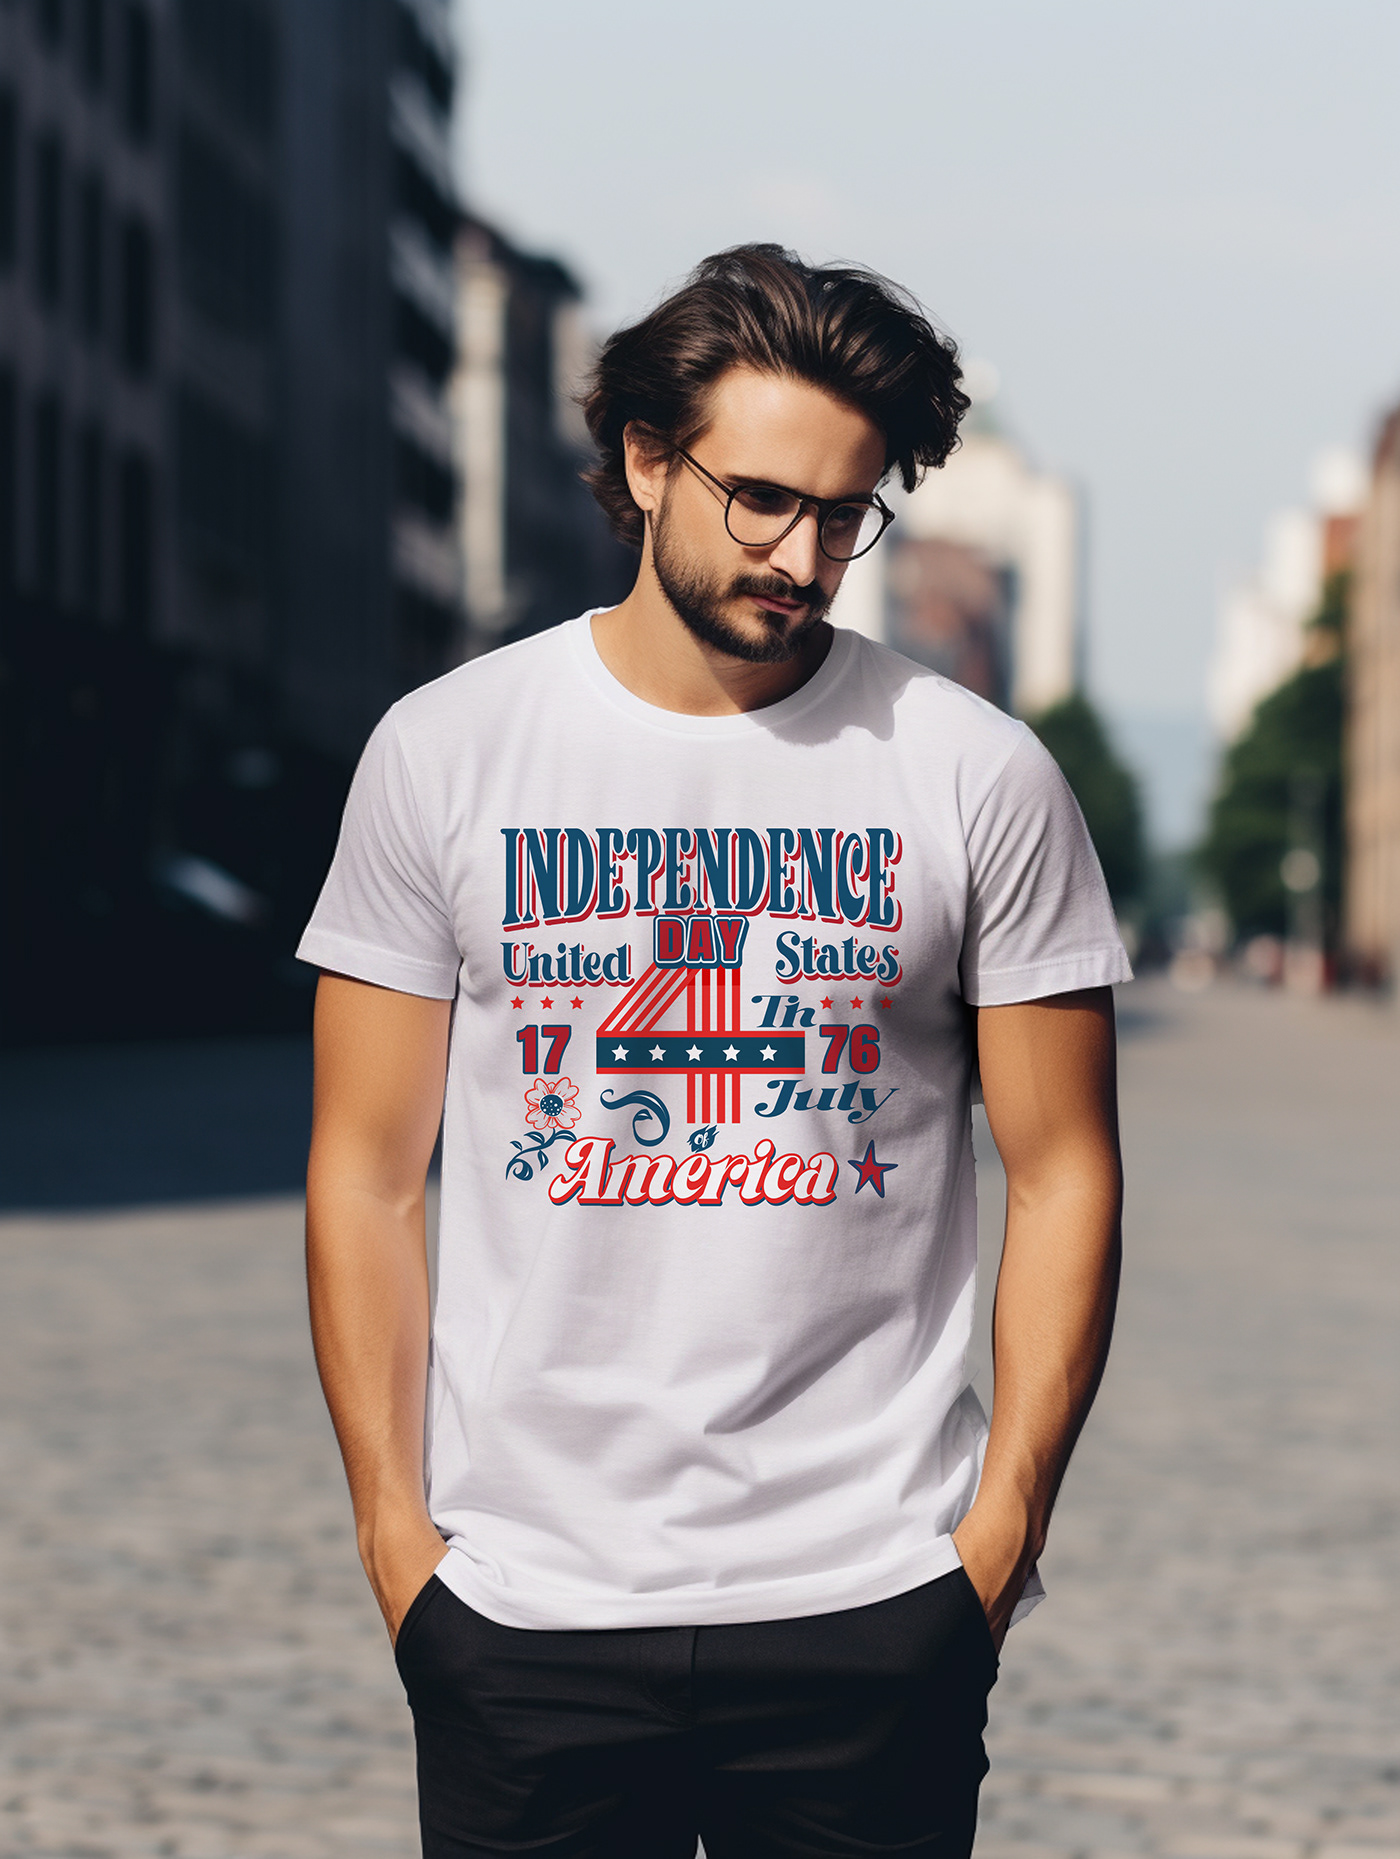 US Independence Day T-shirt Design 